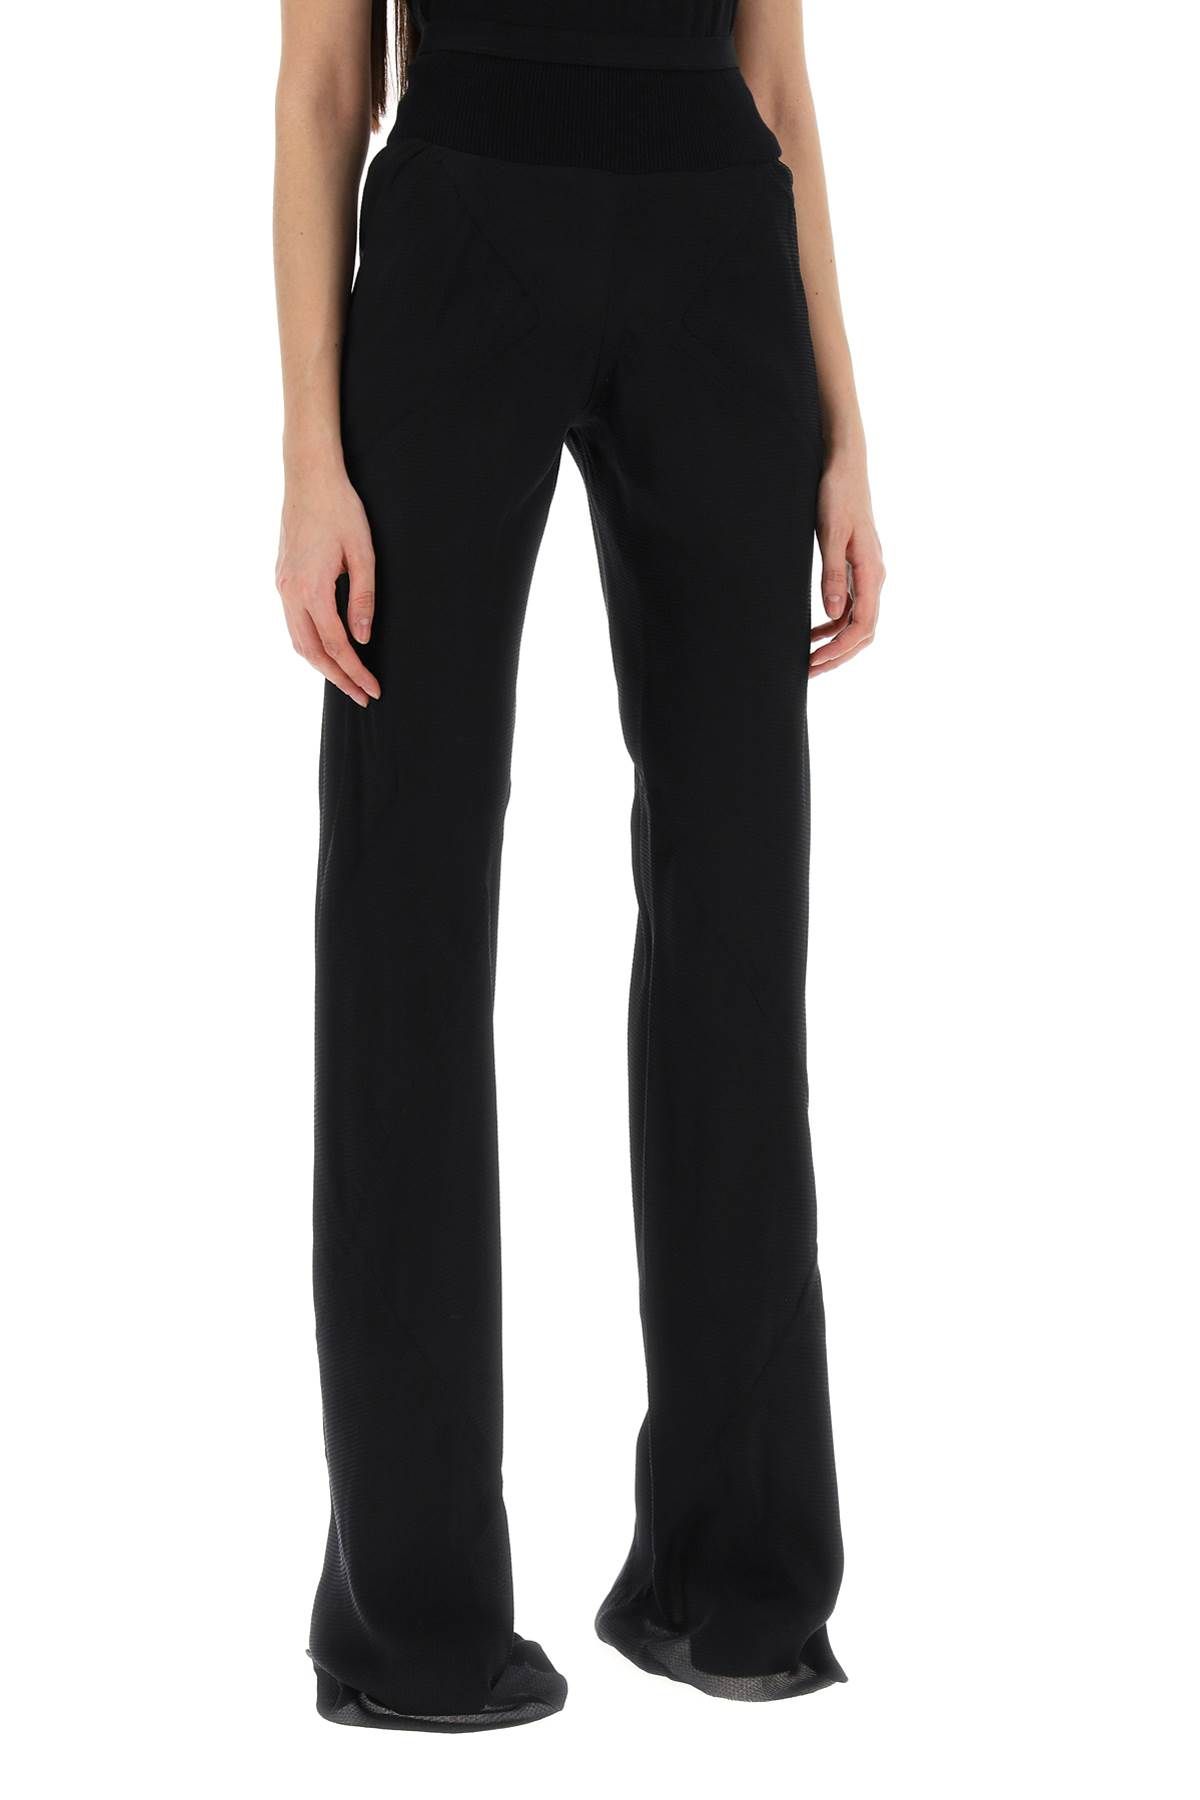 Shop Rick Owens Bias Pants With Slanted Cut And In Black